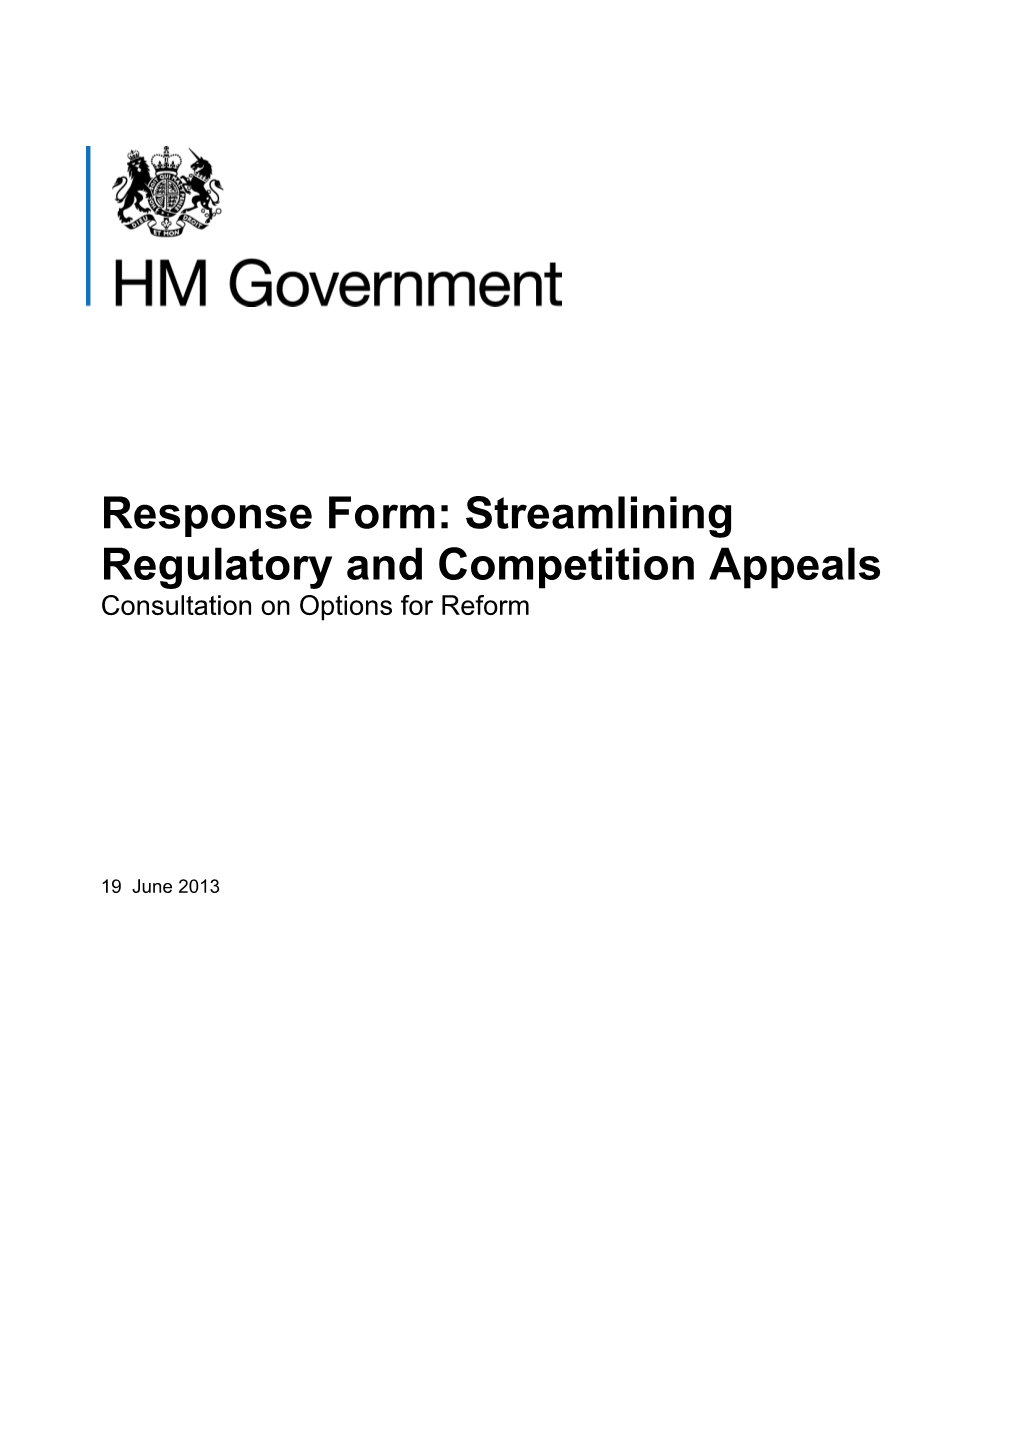 Response Form: Streamlining Regulatory and Competition Appeals